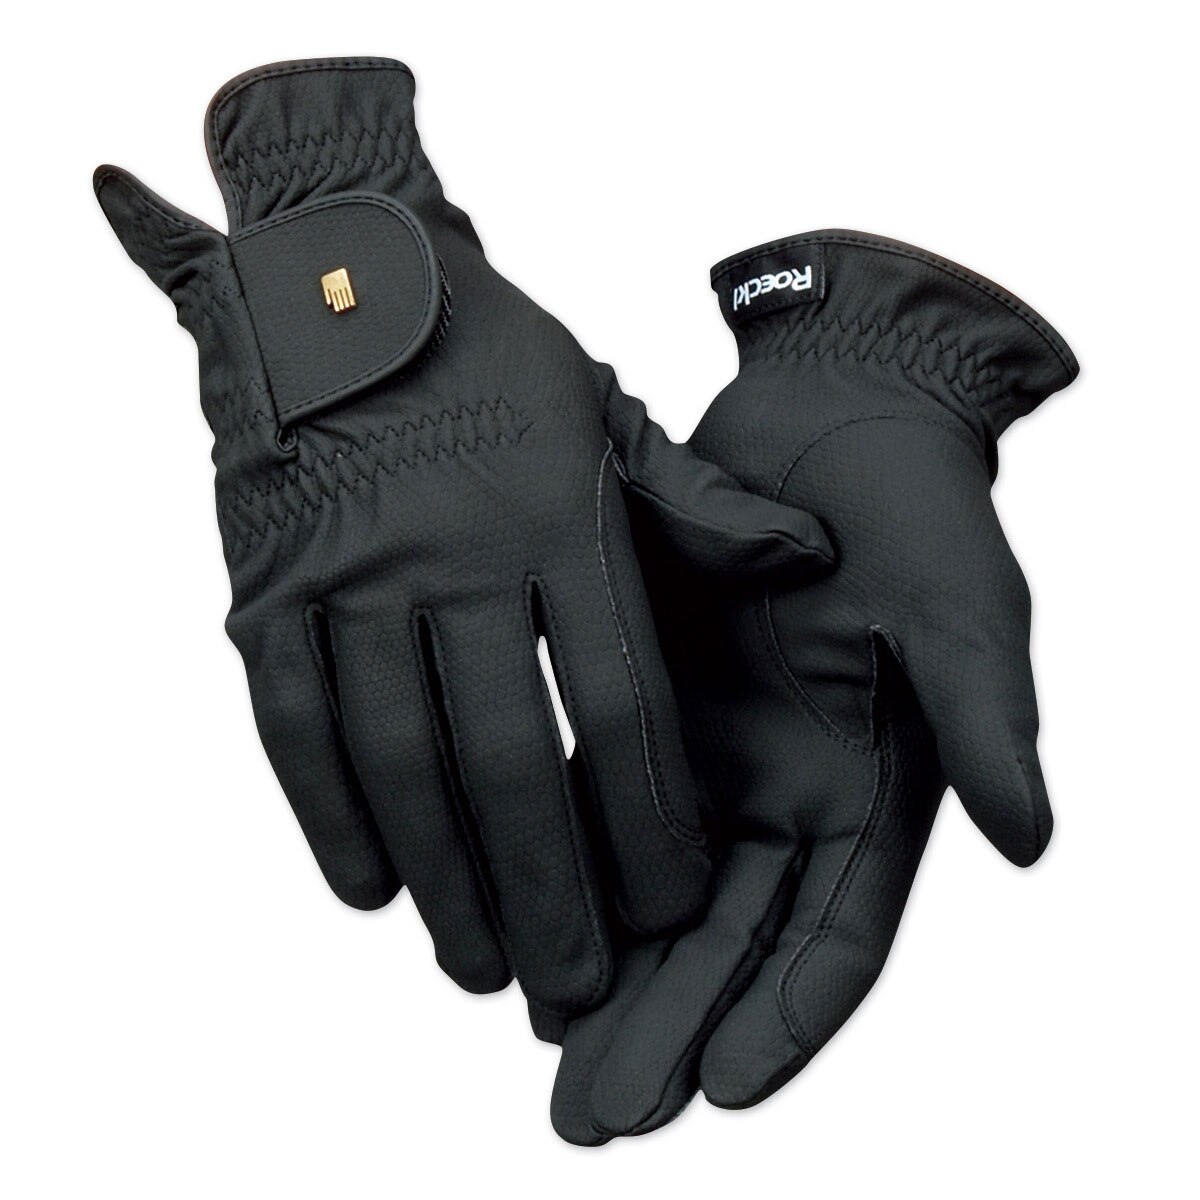 12 pairs of Sure-Grip Riding Gloves Assorted Sizes And Colours Very Hardwearing 